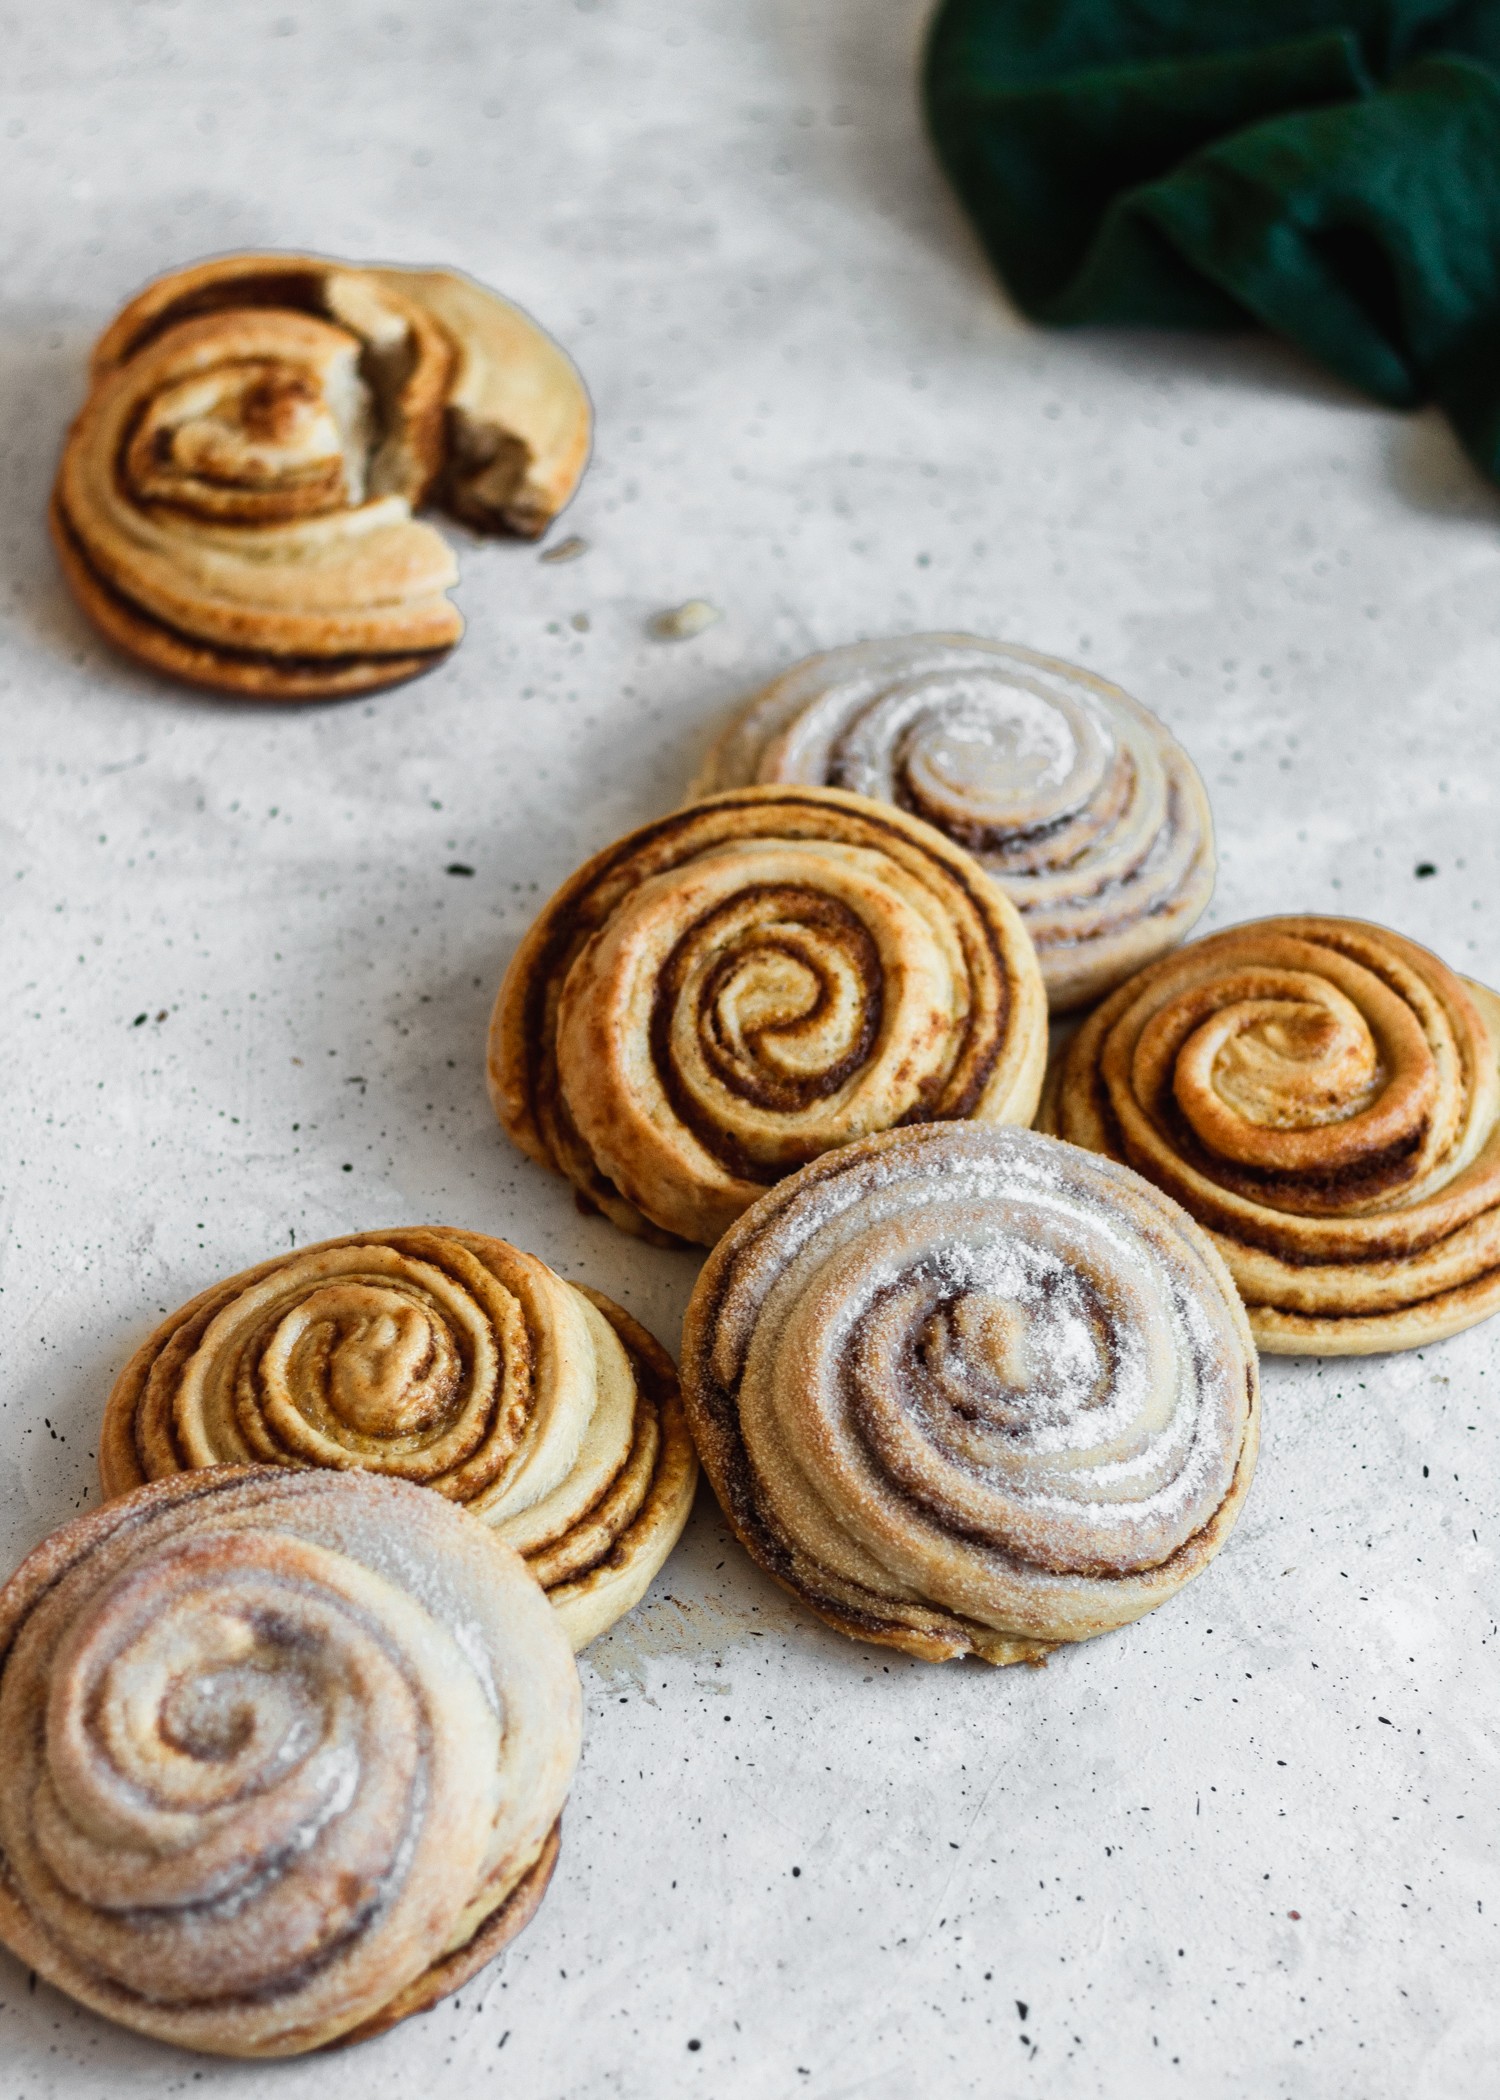 A side shot of cinnamon rolls on a white table with a green linen in the background.